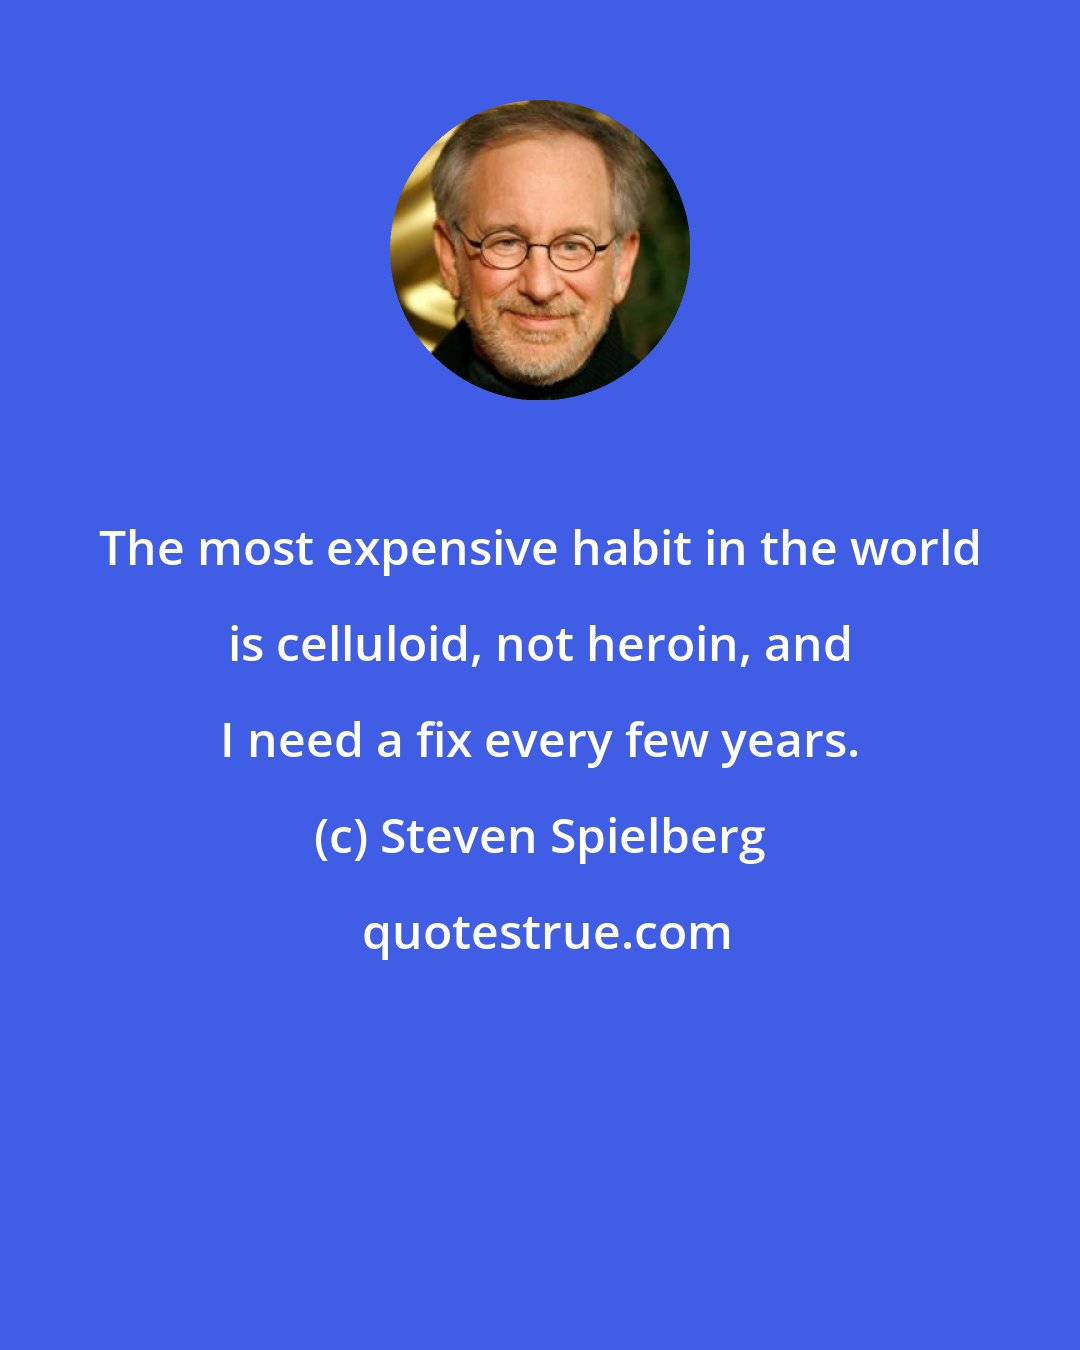 Steven Spielberg: The most expensive habit in the world is celluloid, not heroin, and I need a fix every few years.